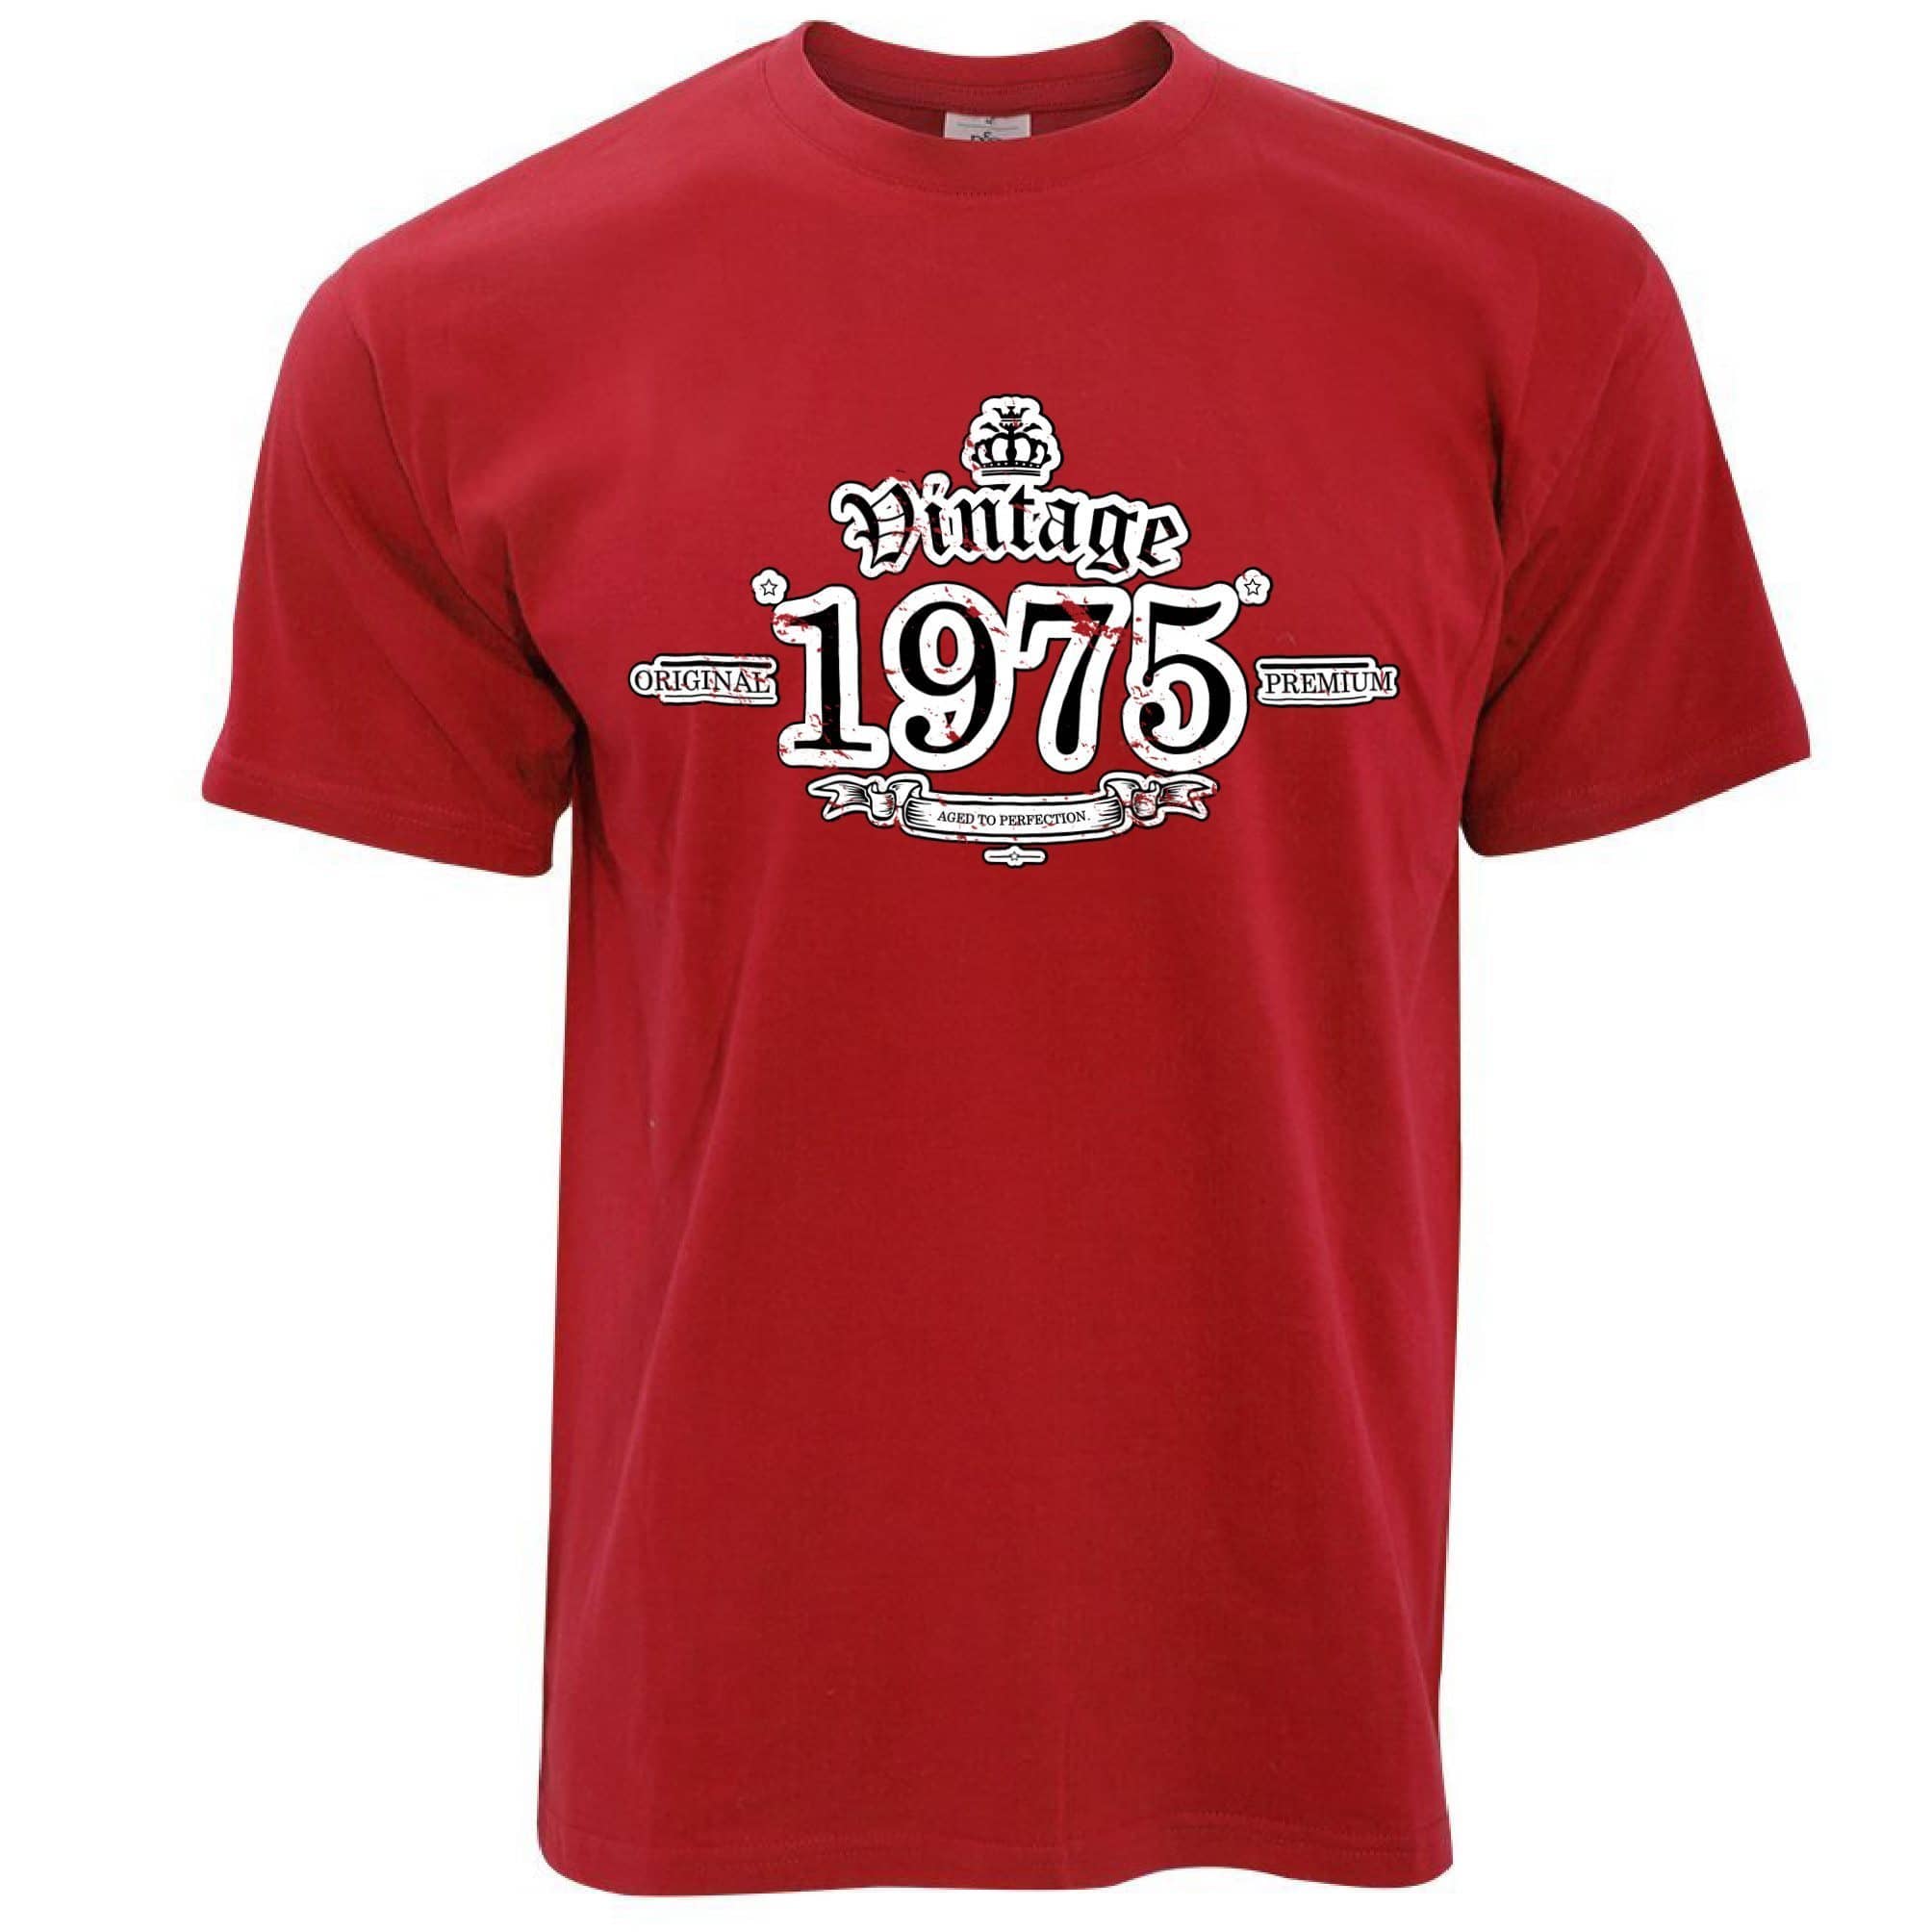 43rd Birthday T Shirt Vintage 1975 Aged To Perfection